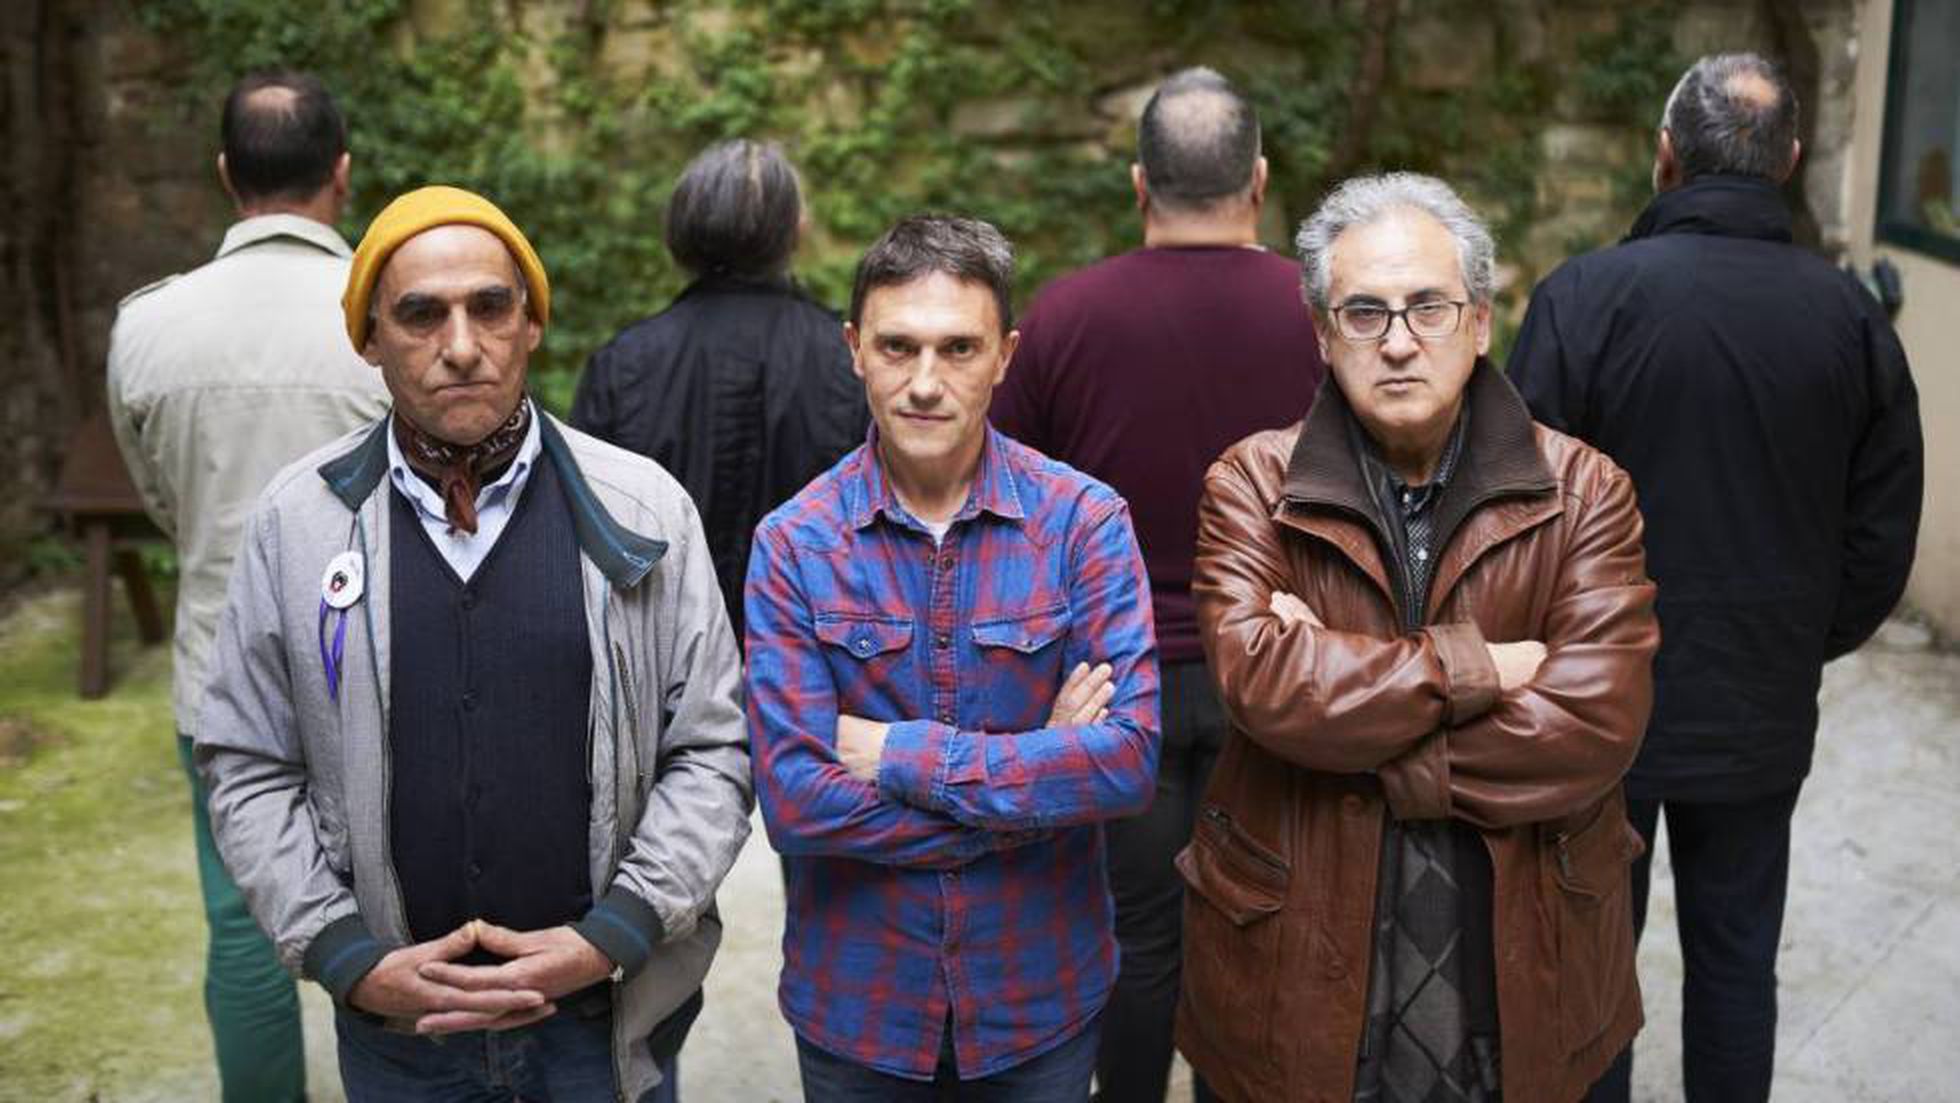 Peio, Mikel and Jesús Zudaire, together with four other members, with their backs turned, of the Association of Victims of Abuse in Religious Centers of Navarra. Peio, Mikel y Jesús Zudaire, junto a otros cuatro miembros, de espaldas, de la Asociación de Victimas de Abusos en Centros Religiosos de Navarra. Pablo Lasaosa